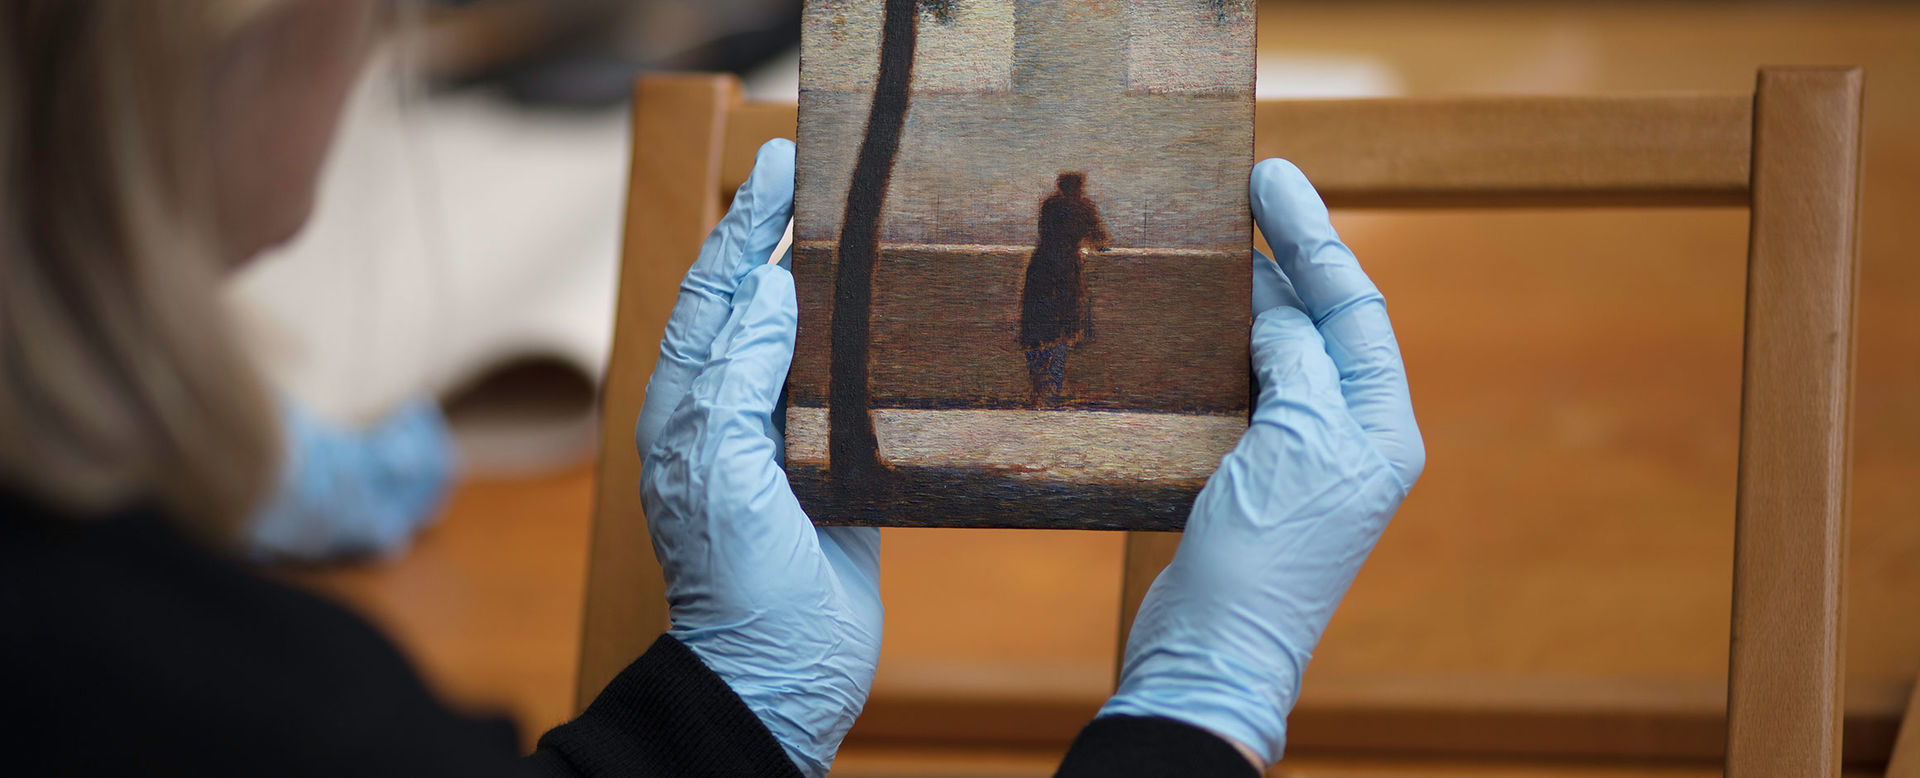 View from over the shoulder of a conservator holding a small rectangular painting in blue rubber gloves; the painting is rendered in short brush strokes that form a kenetic image of a dark, silhouetted tree trunk in the foreground and lone silhouetted figure standing and leaning against a solid, waist-high wall overlooking a faint building in the distance.